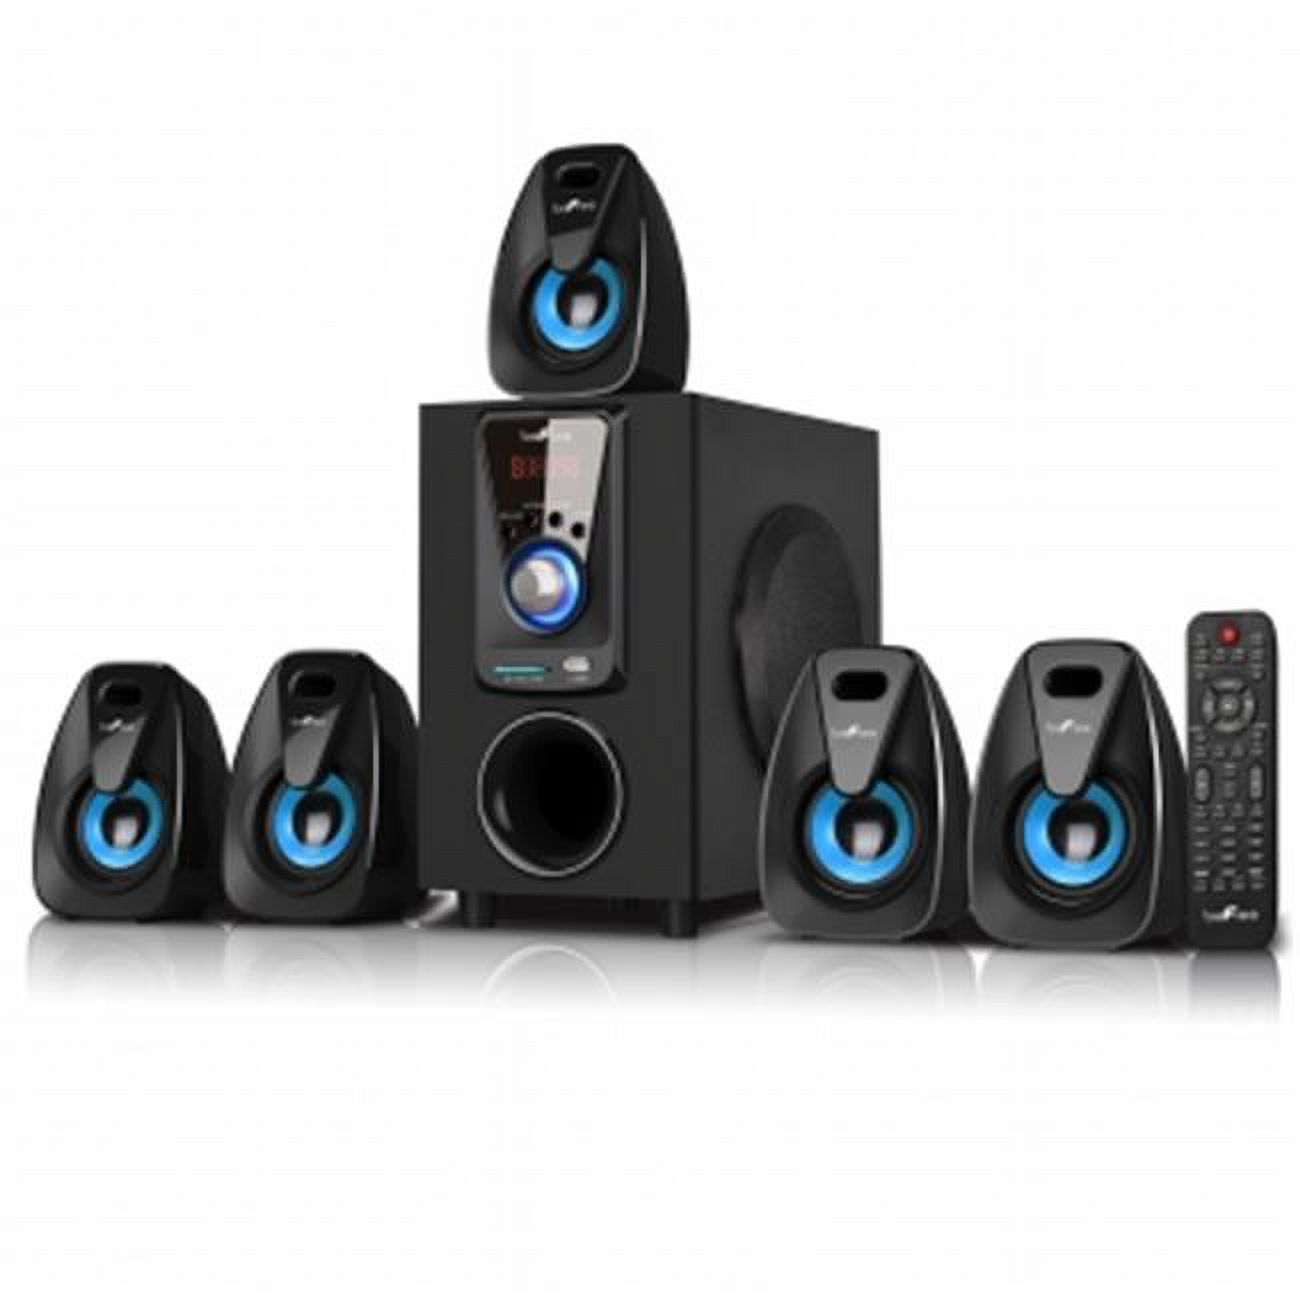 5.1 Channel Surround Sound Bluetooth Speaker System with 4 in. Amplifier, Blue - image 1 of 1